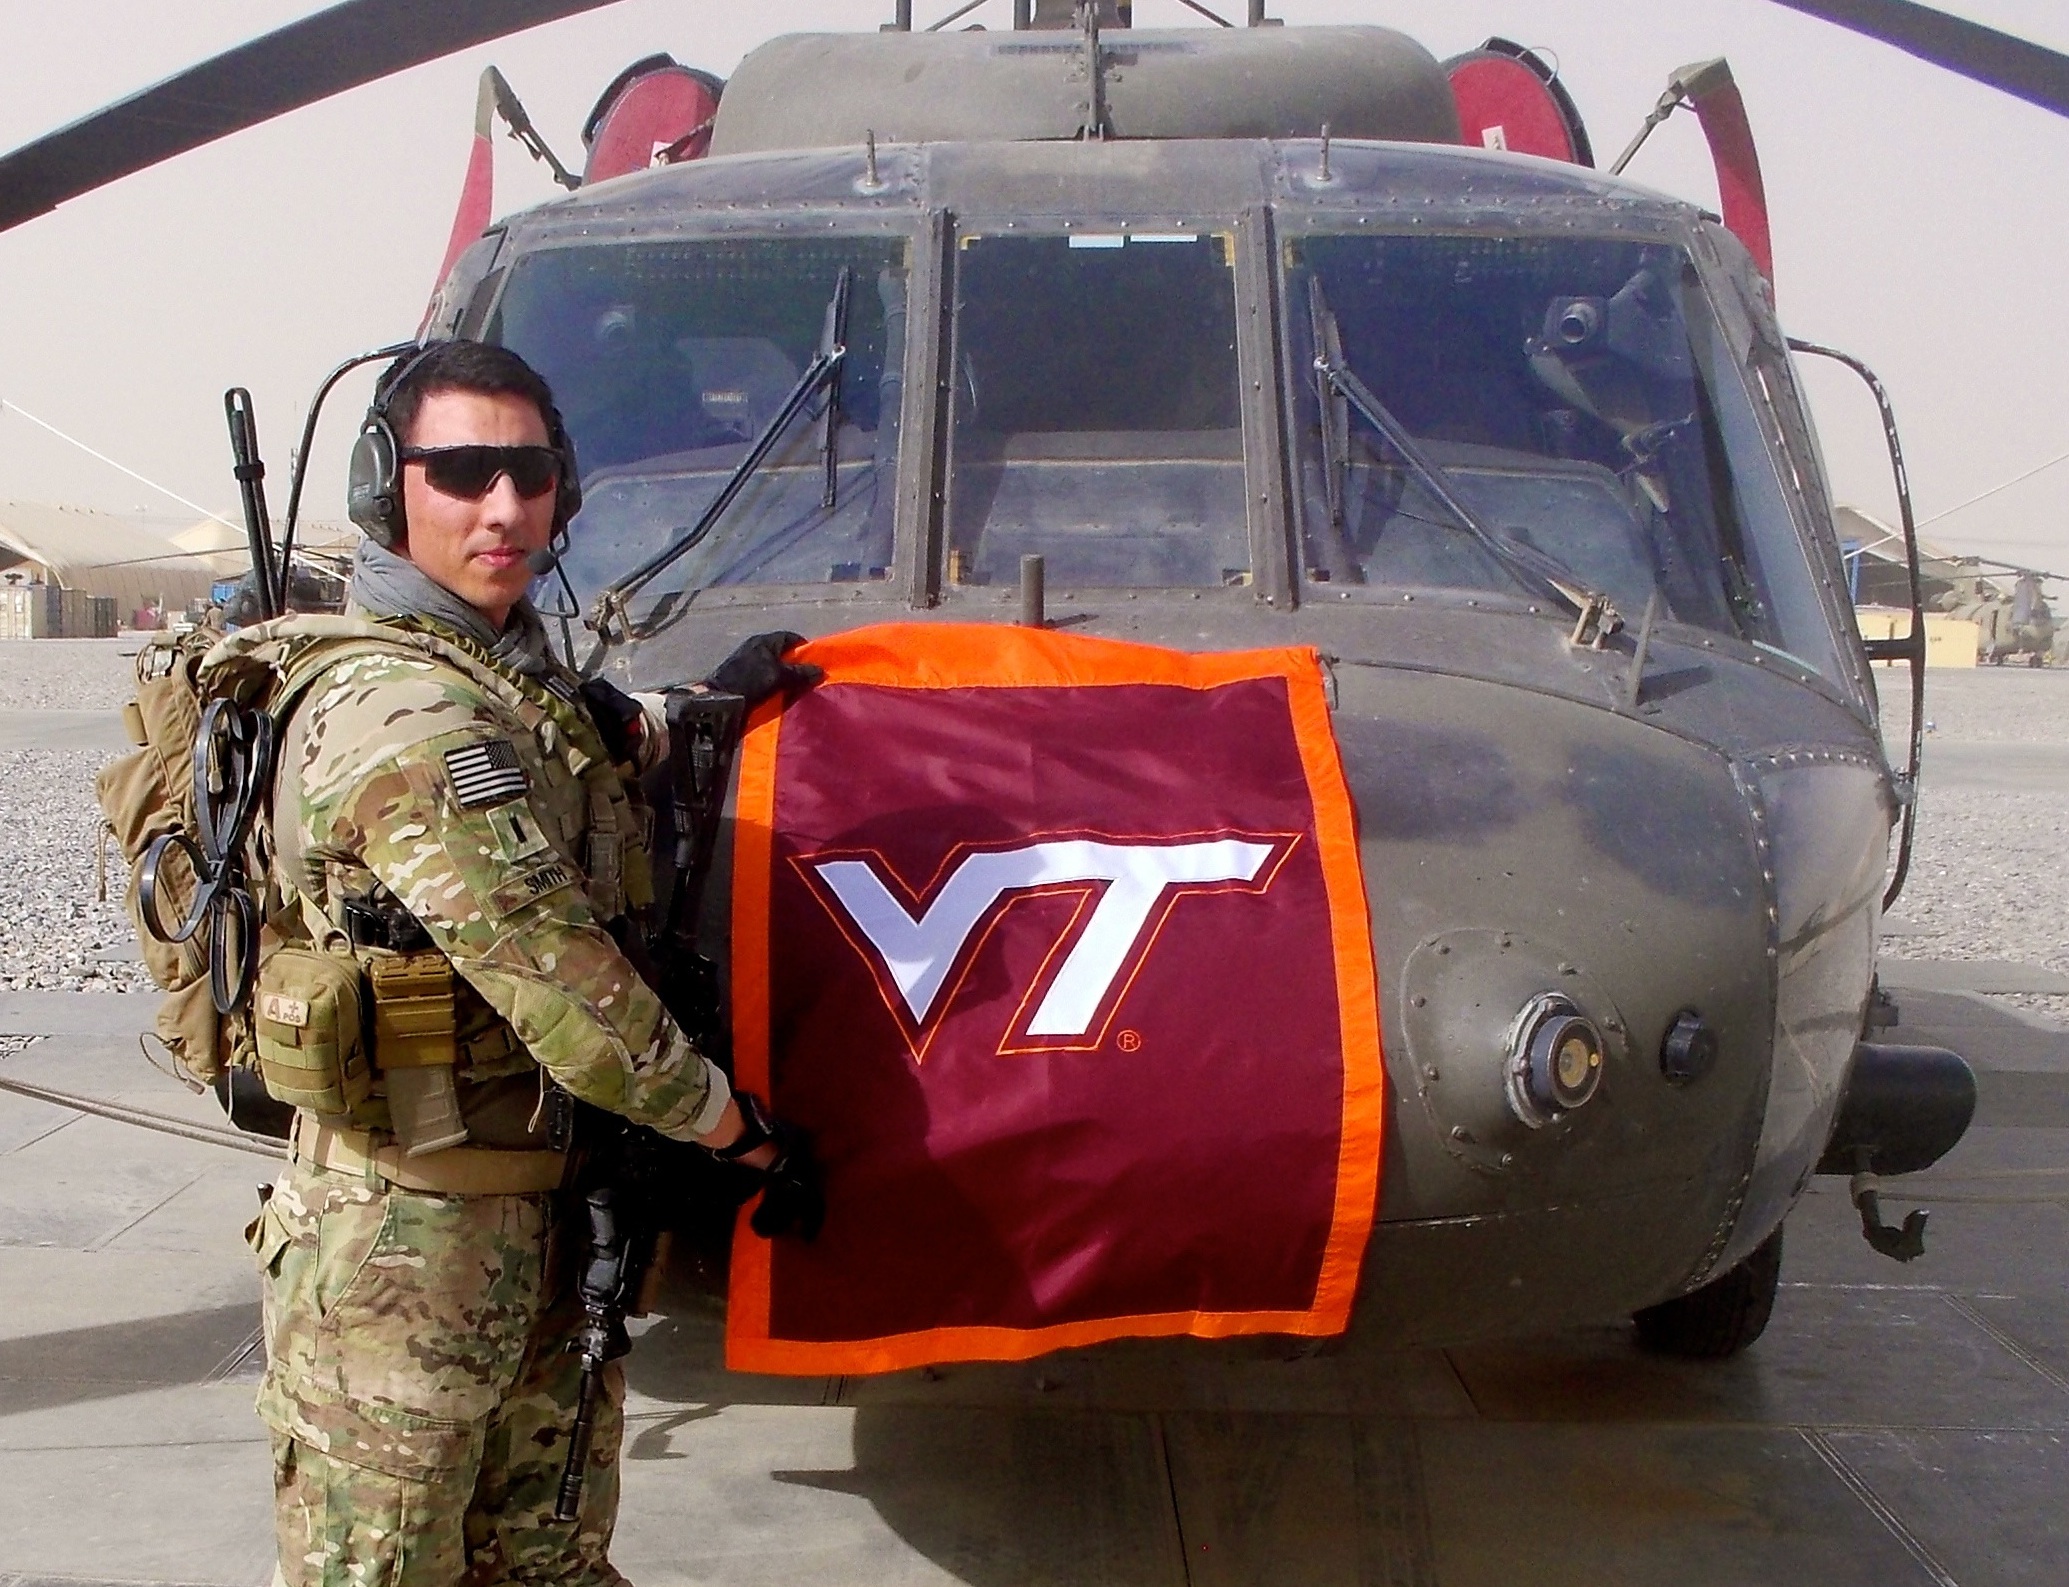 1st Lt. Matthew Smith, U.S. Army, Virginia Tech Corps of Cadets Class of 2011 in front of his helicopter.